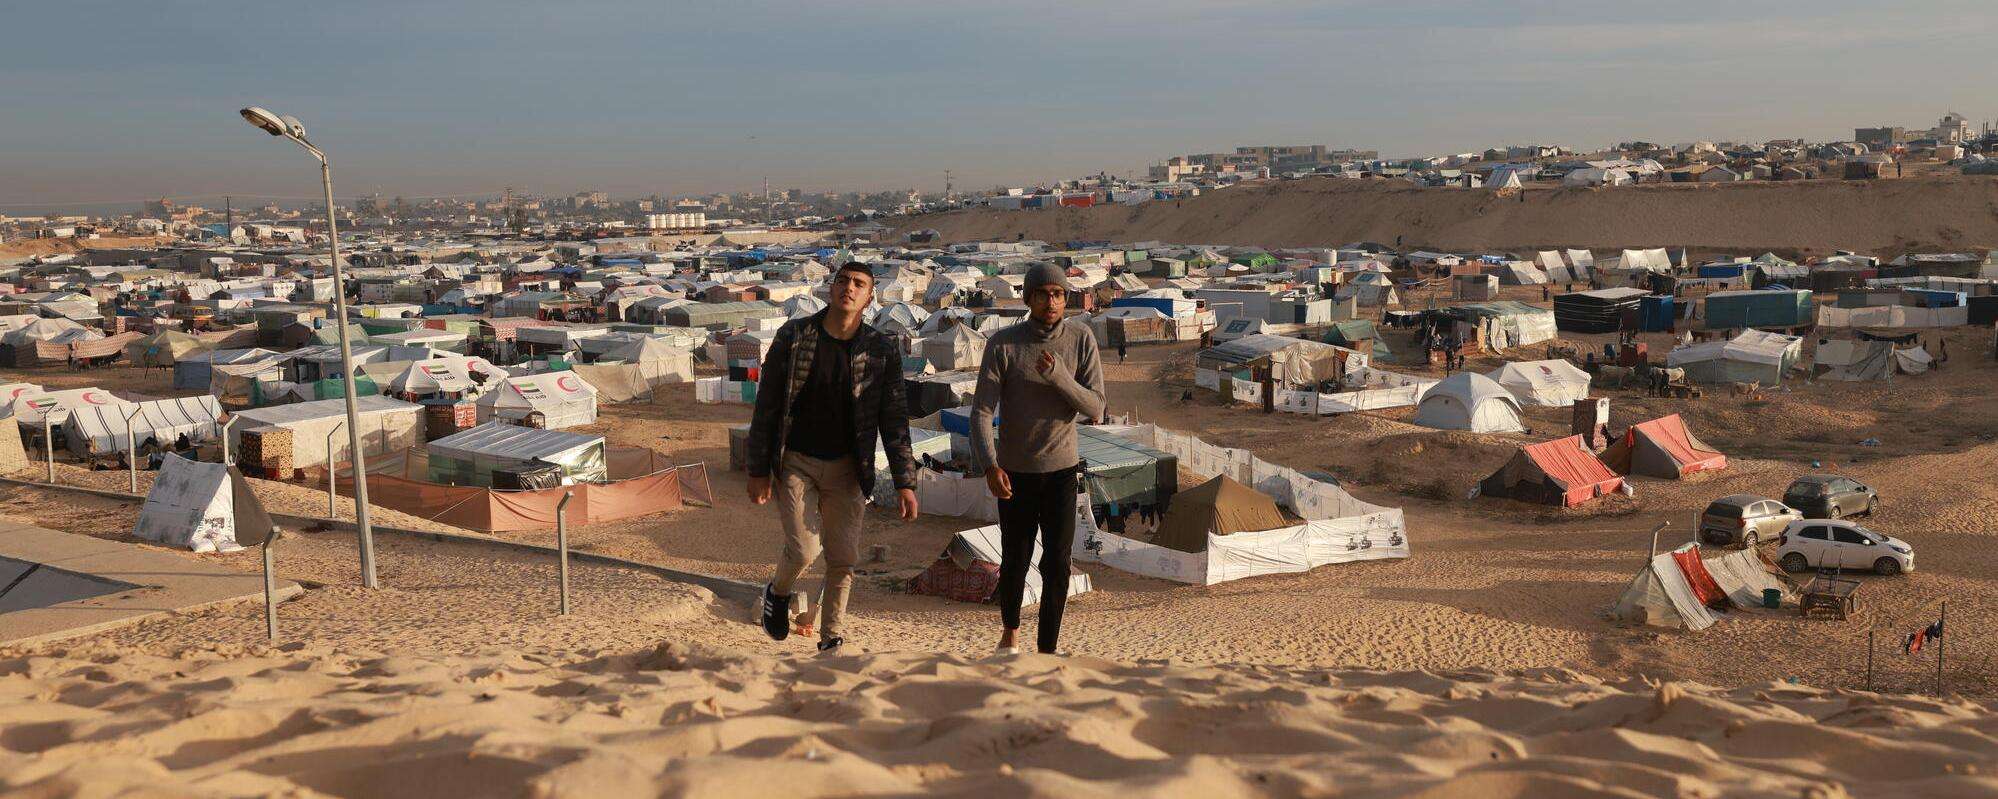 Palestinian men walk on a dune near an informal camp for displaced Palestinians in the coastal area of Mawasi Rafah, in the south of the Gaza Strip.